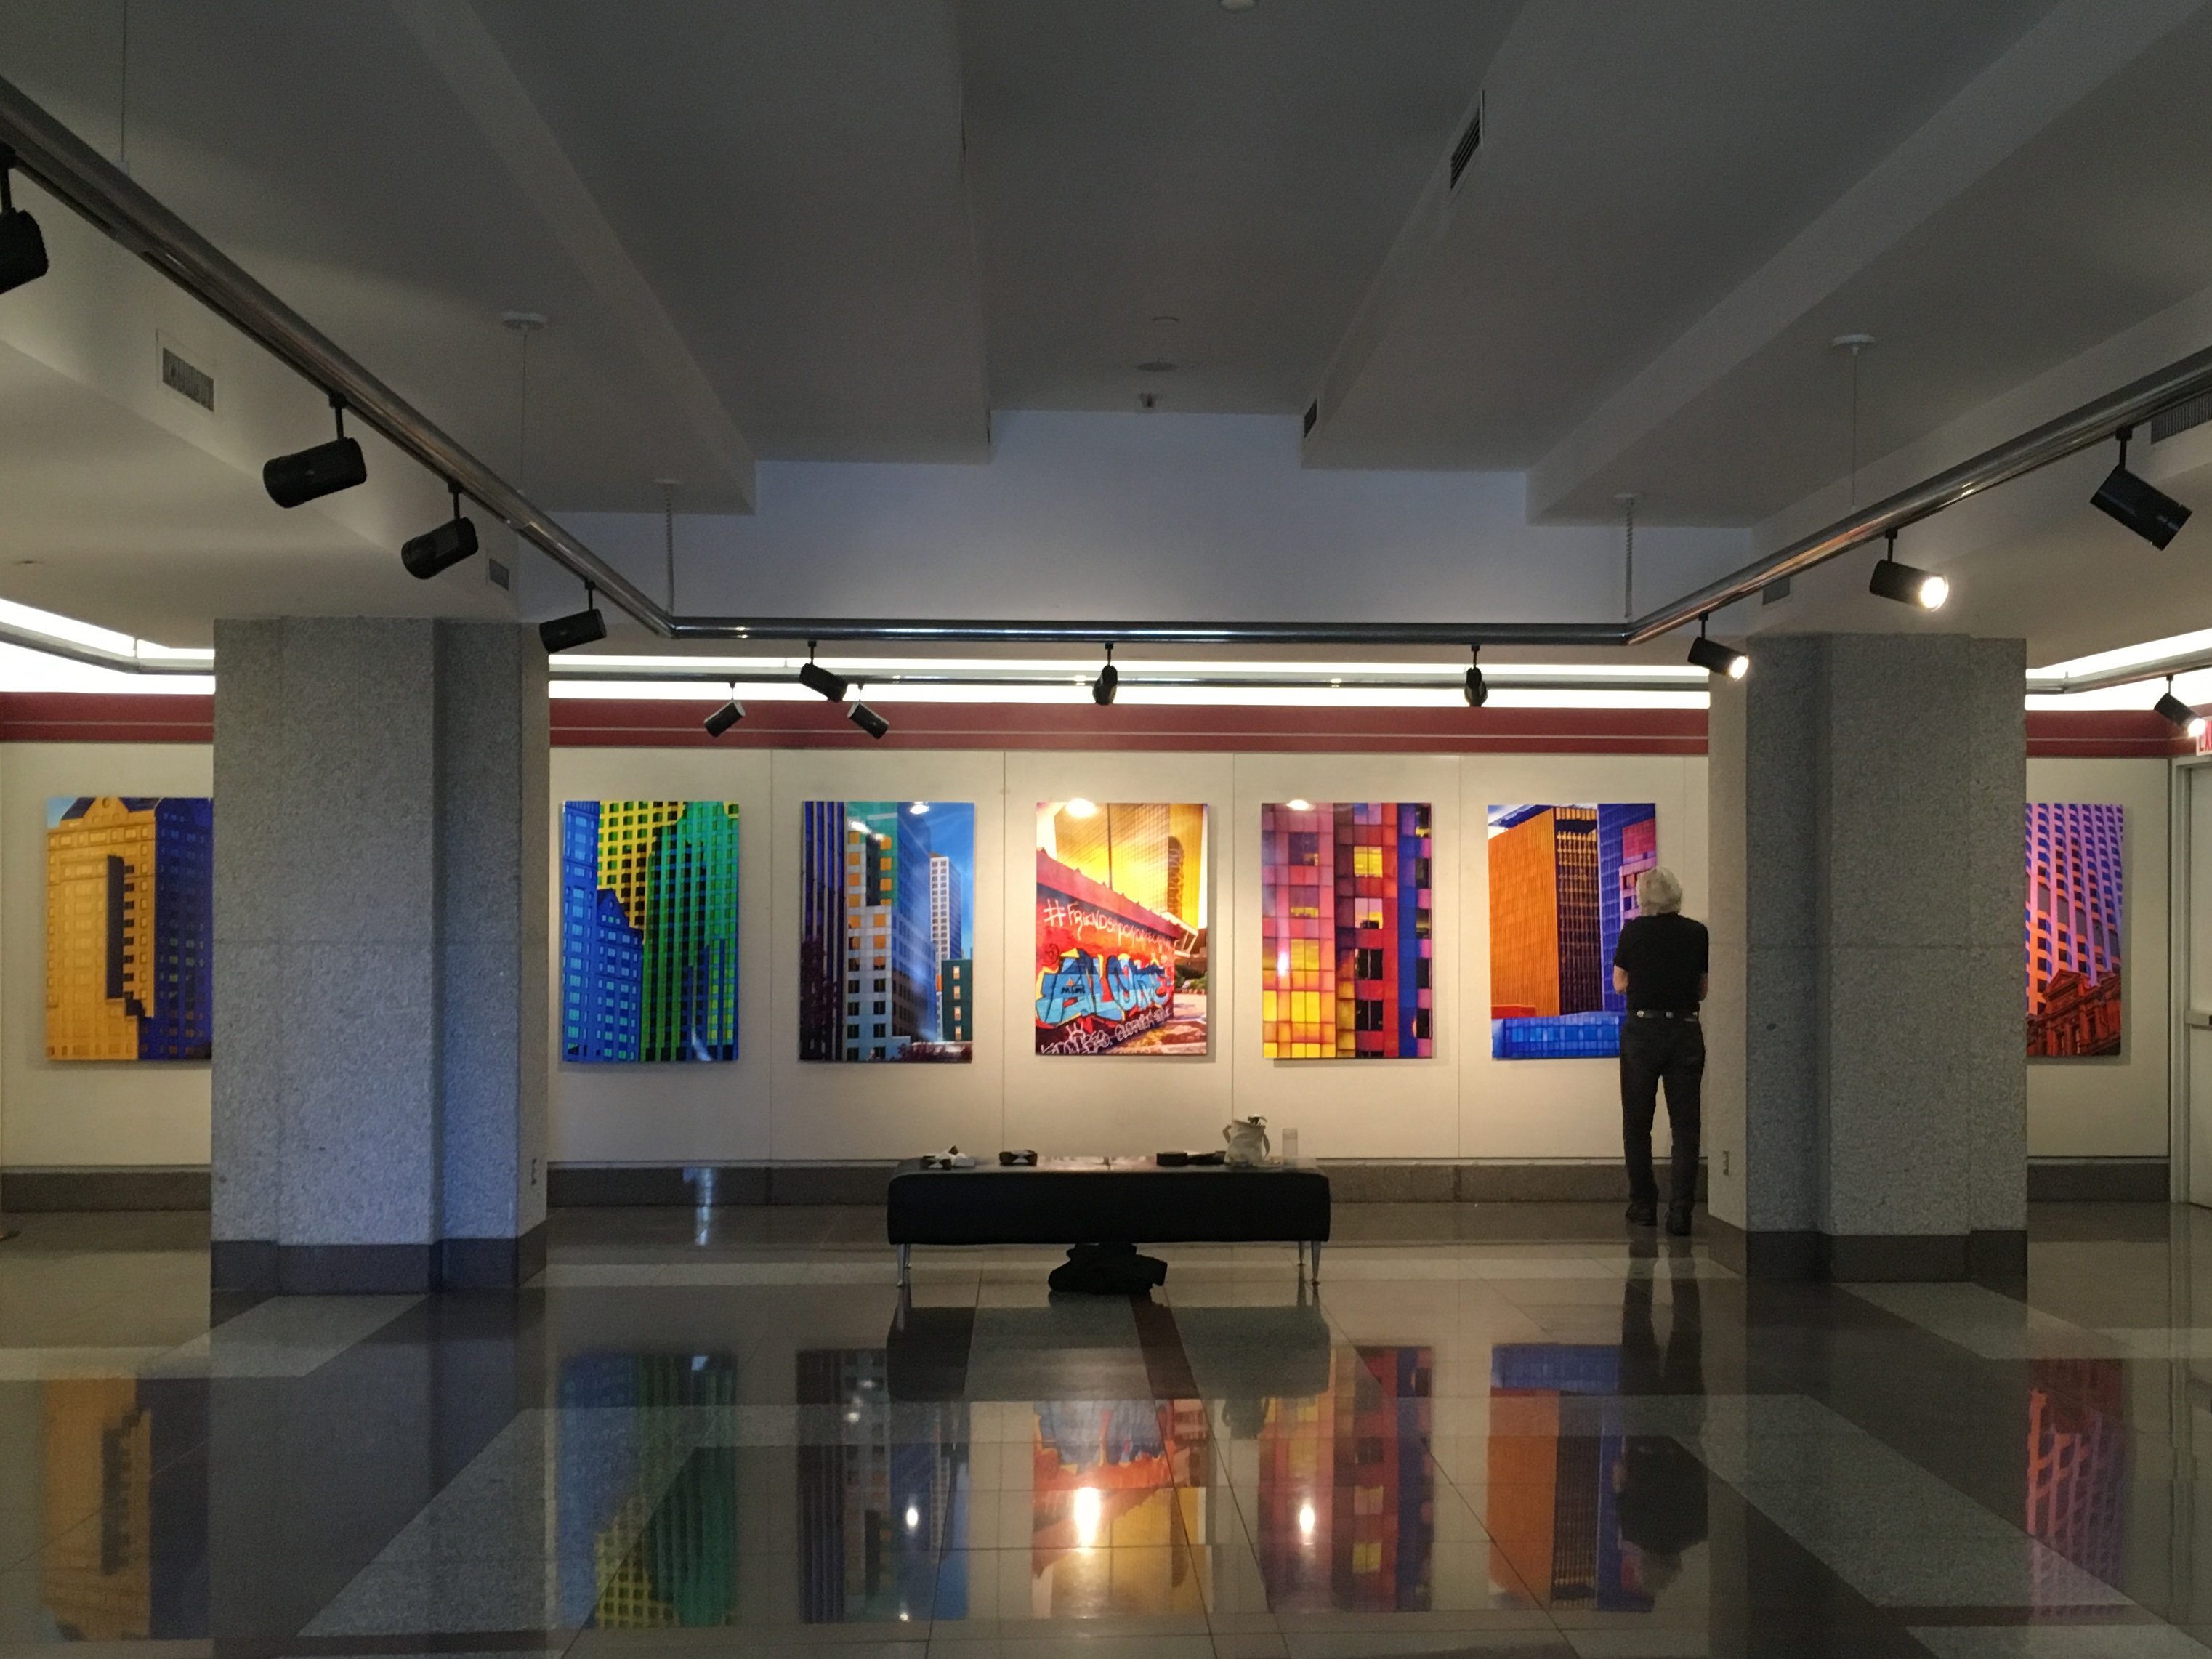 Gallery at 100 Pearl Street